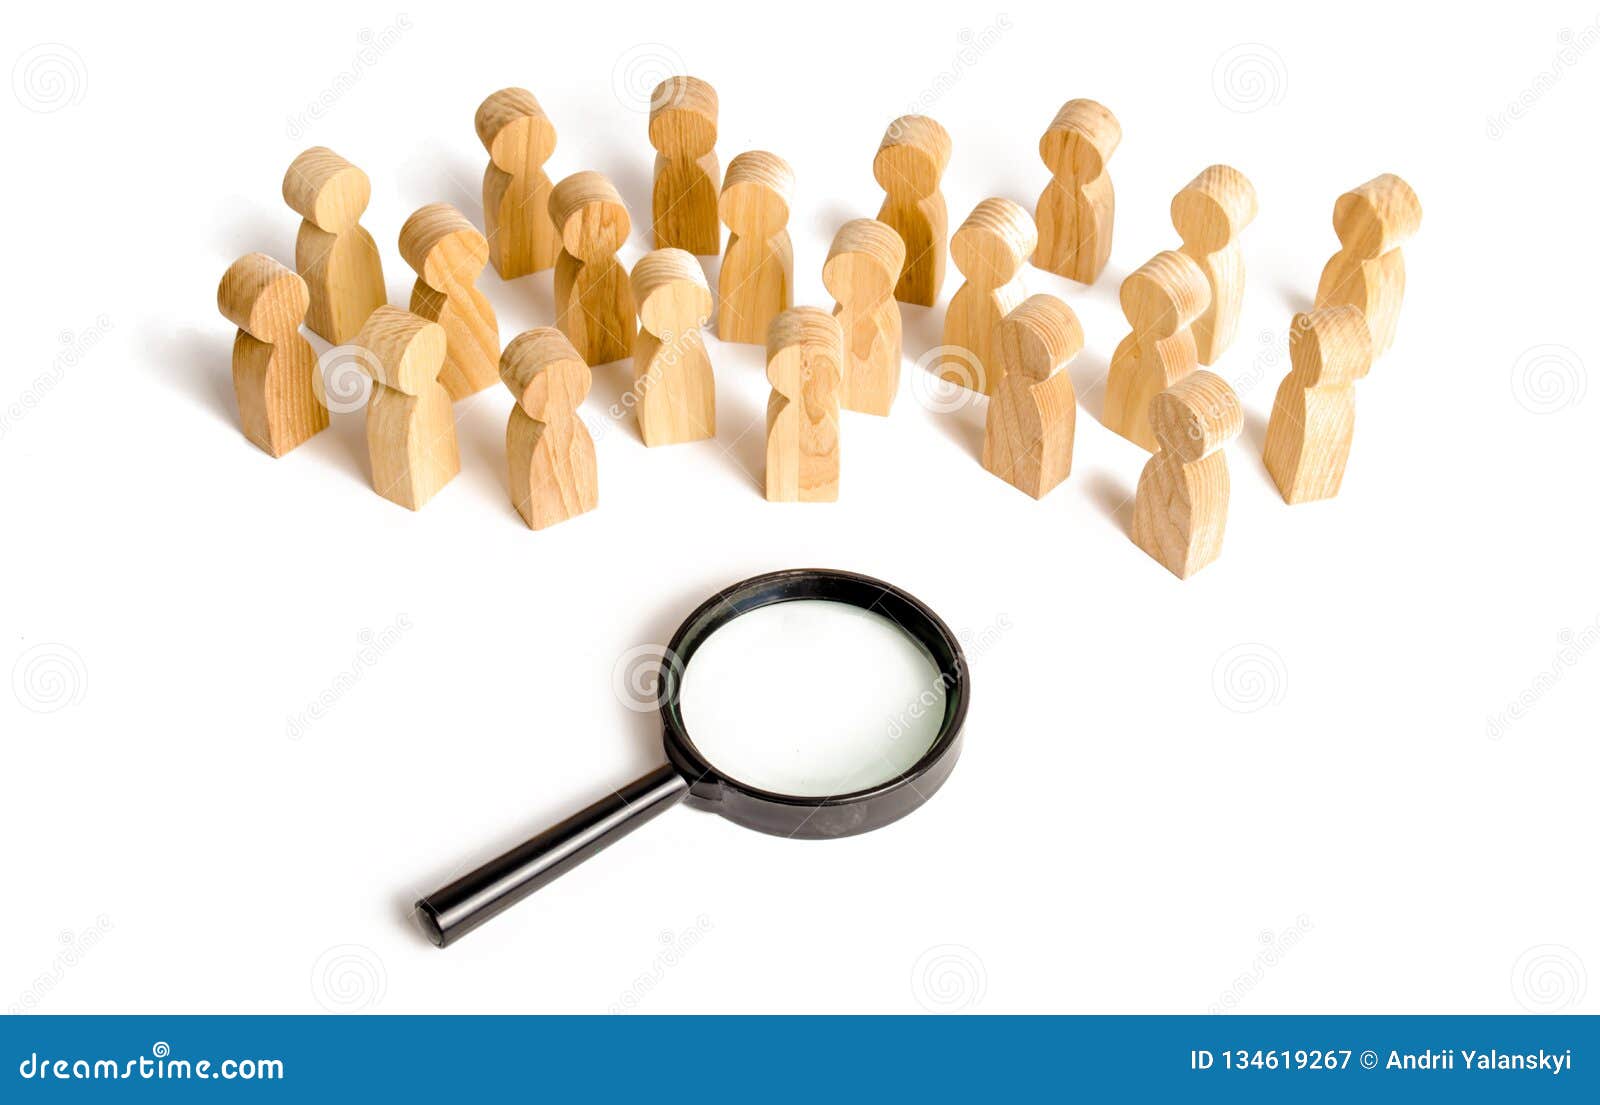 Huge Crowd of People Stand Near a Magnifying Glass on a White Background.  Search for Work. Human Resources, Management Stock Image - Image of white,  search: 134619267